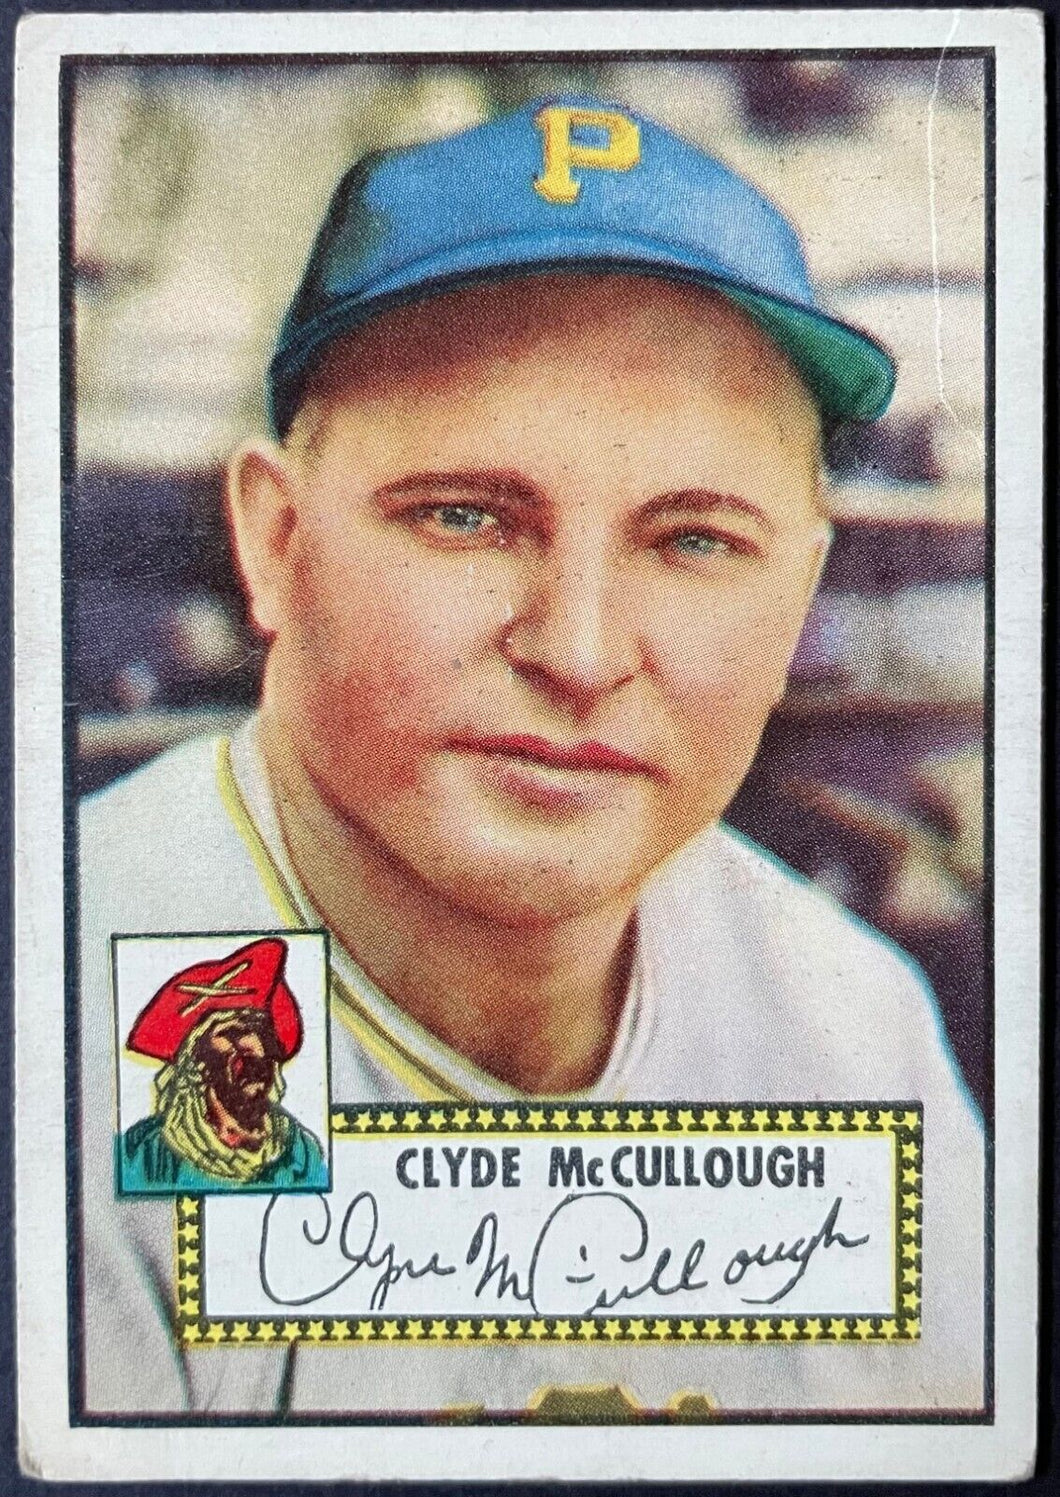 1952 Topps Baseball Clyde McCullough #218 Pittsburgh Pirates MLB Card Vintage